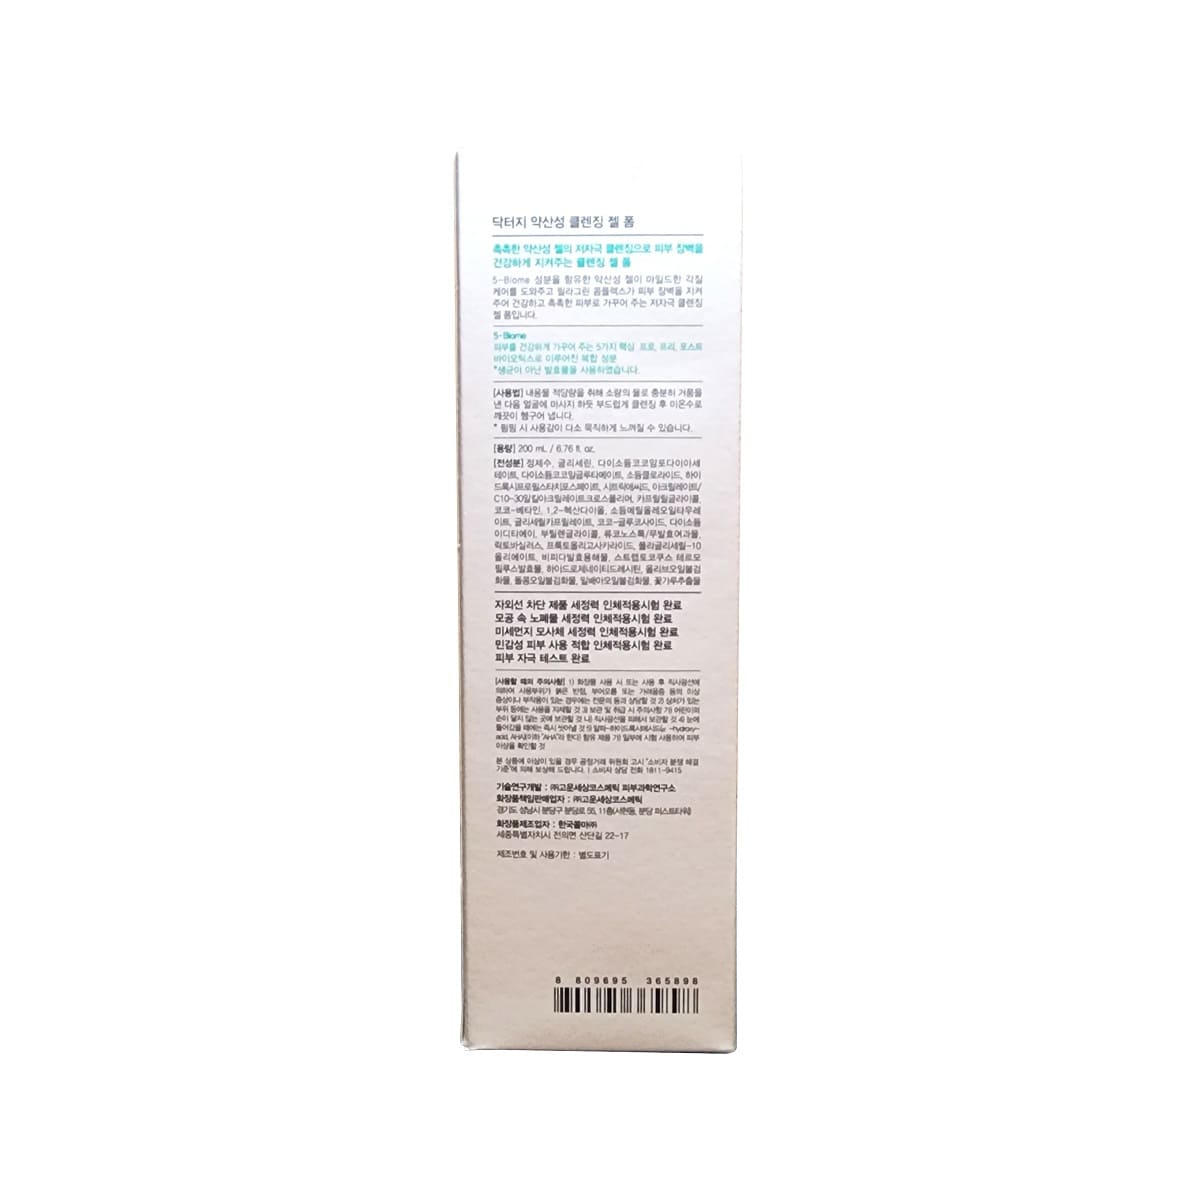 Ingredients, Cautions, Directions for Dr.G pH Cleansing Gel Foam (200 mL) in Korean